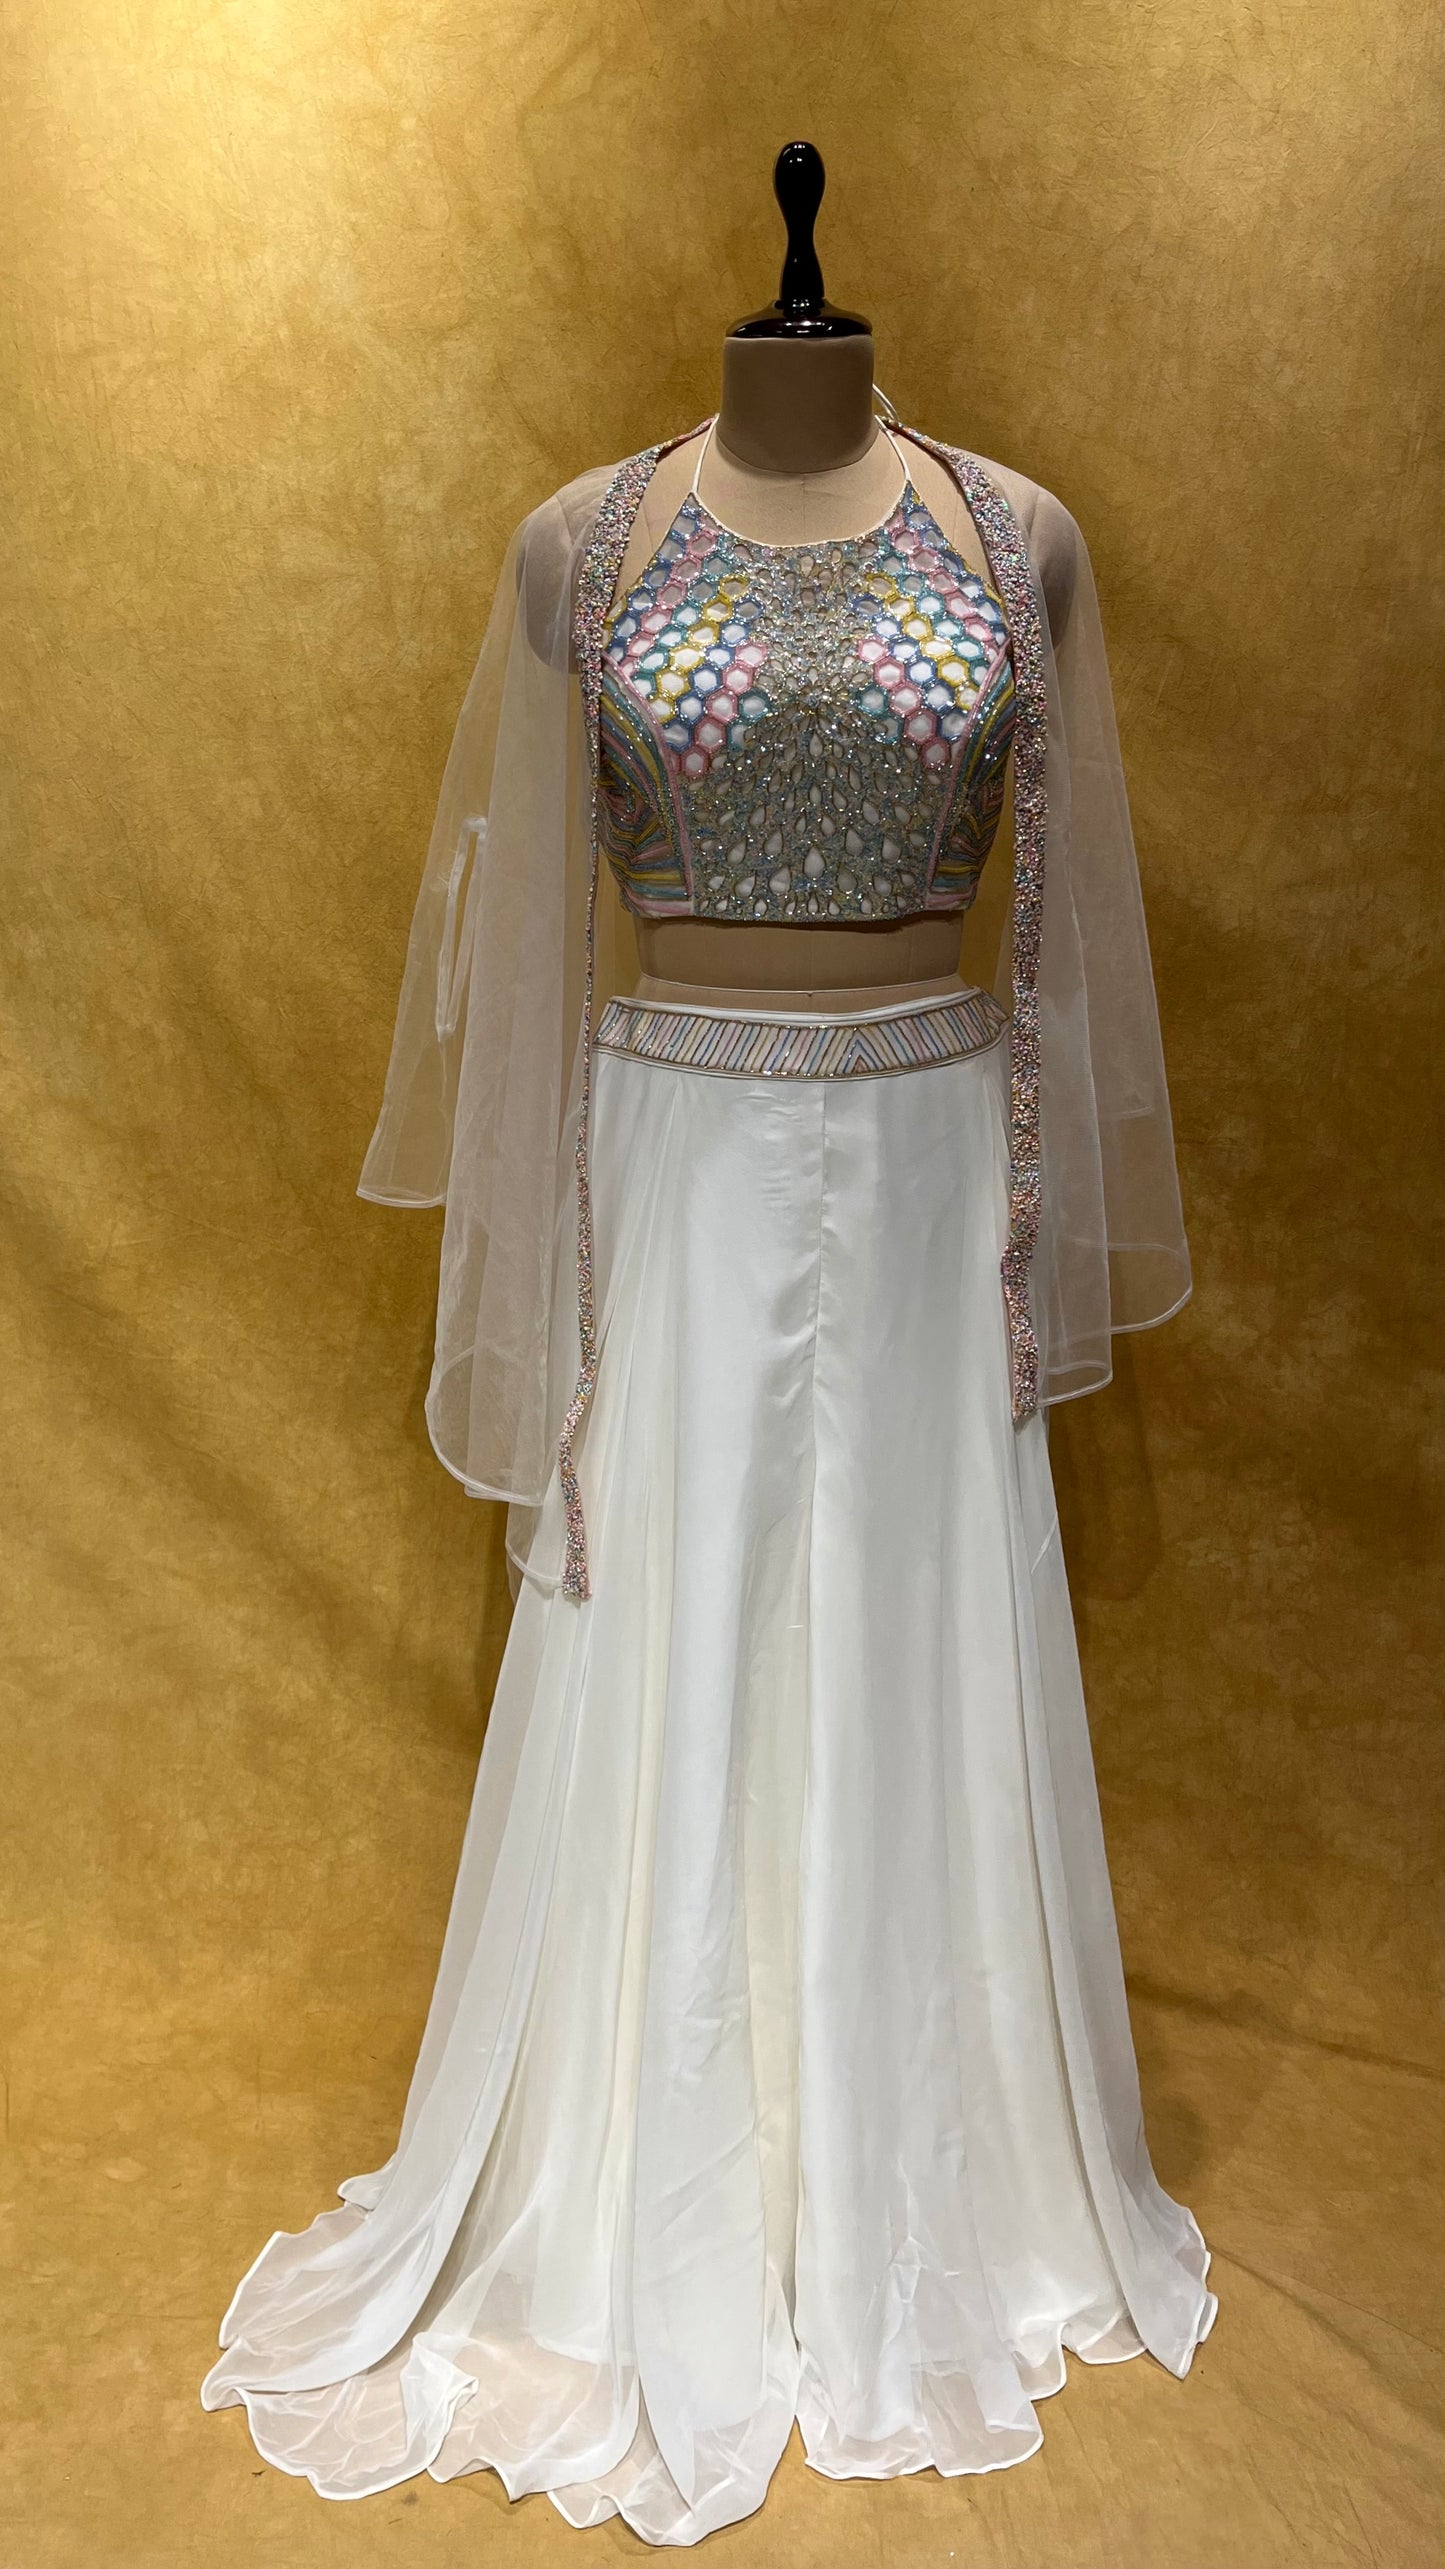 WHITE COLOUR ORGANZA PALAZZO WITH HAND EMBROIDERED CROP TOP BLOUSE & NET SHRUG EMBELLISHED WITH CUTDANA WORK